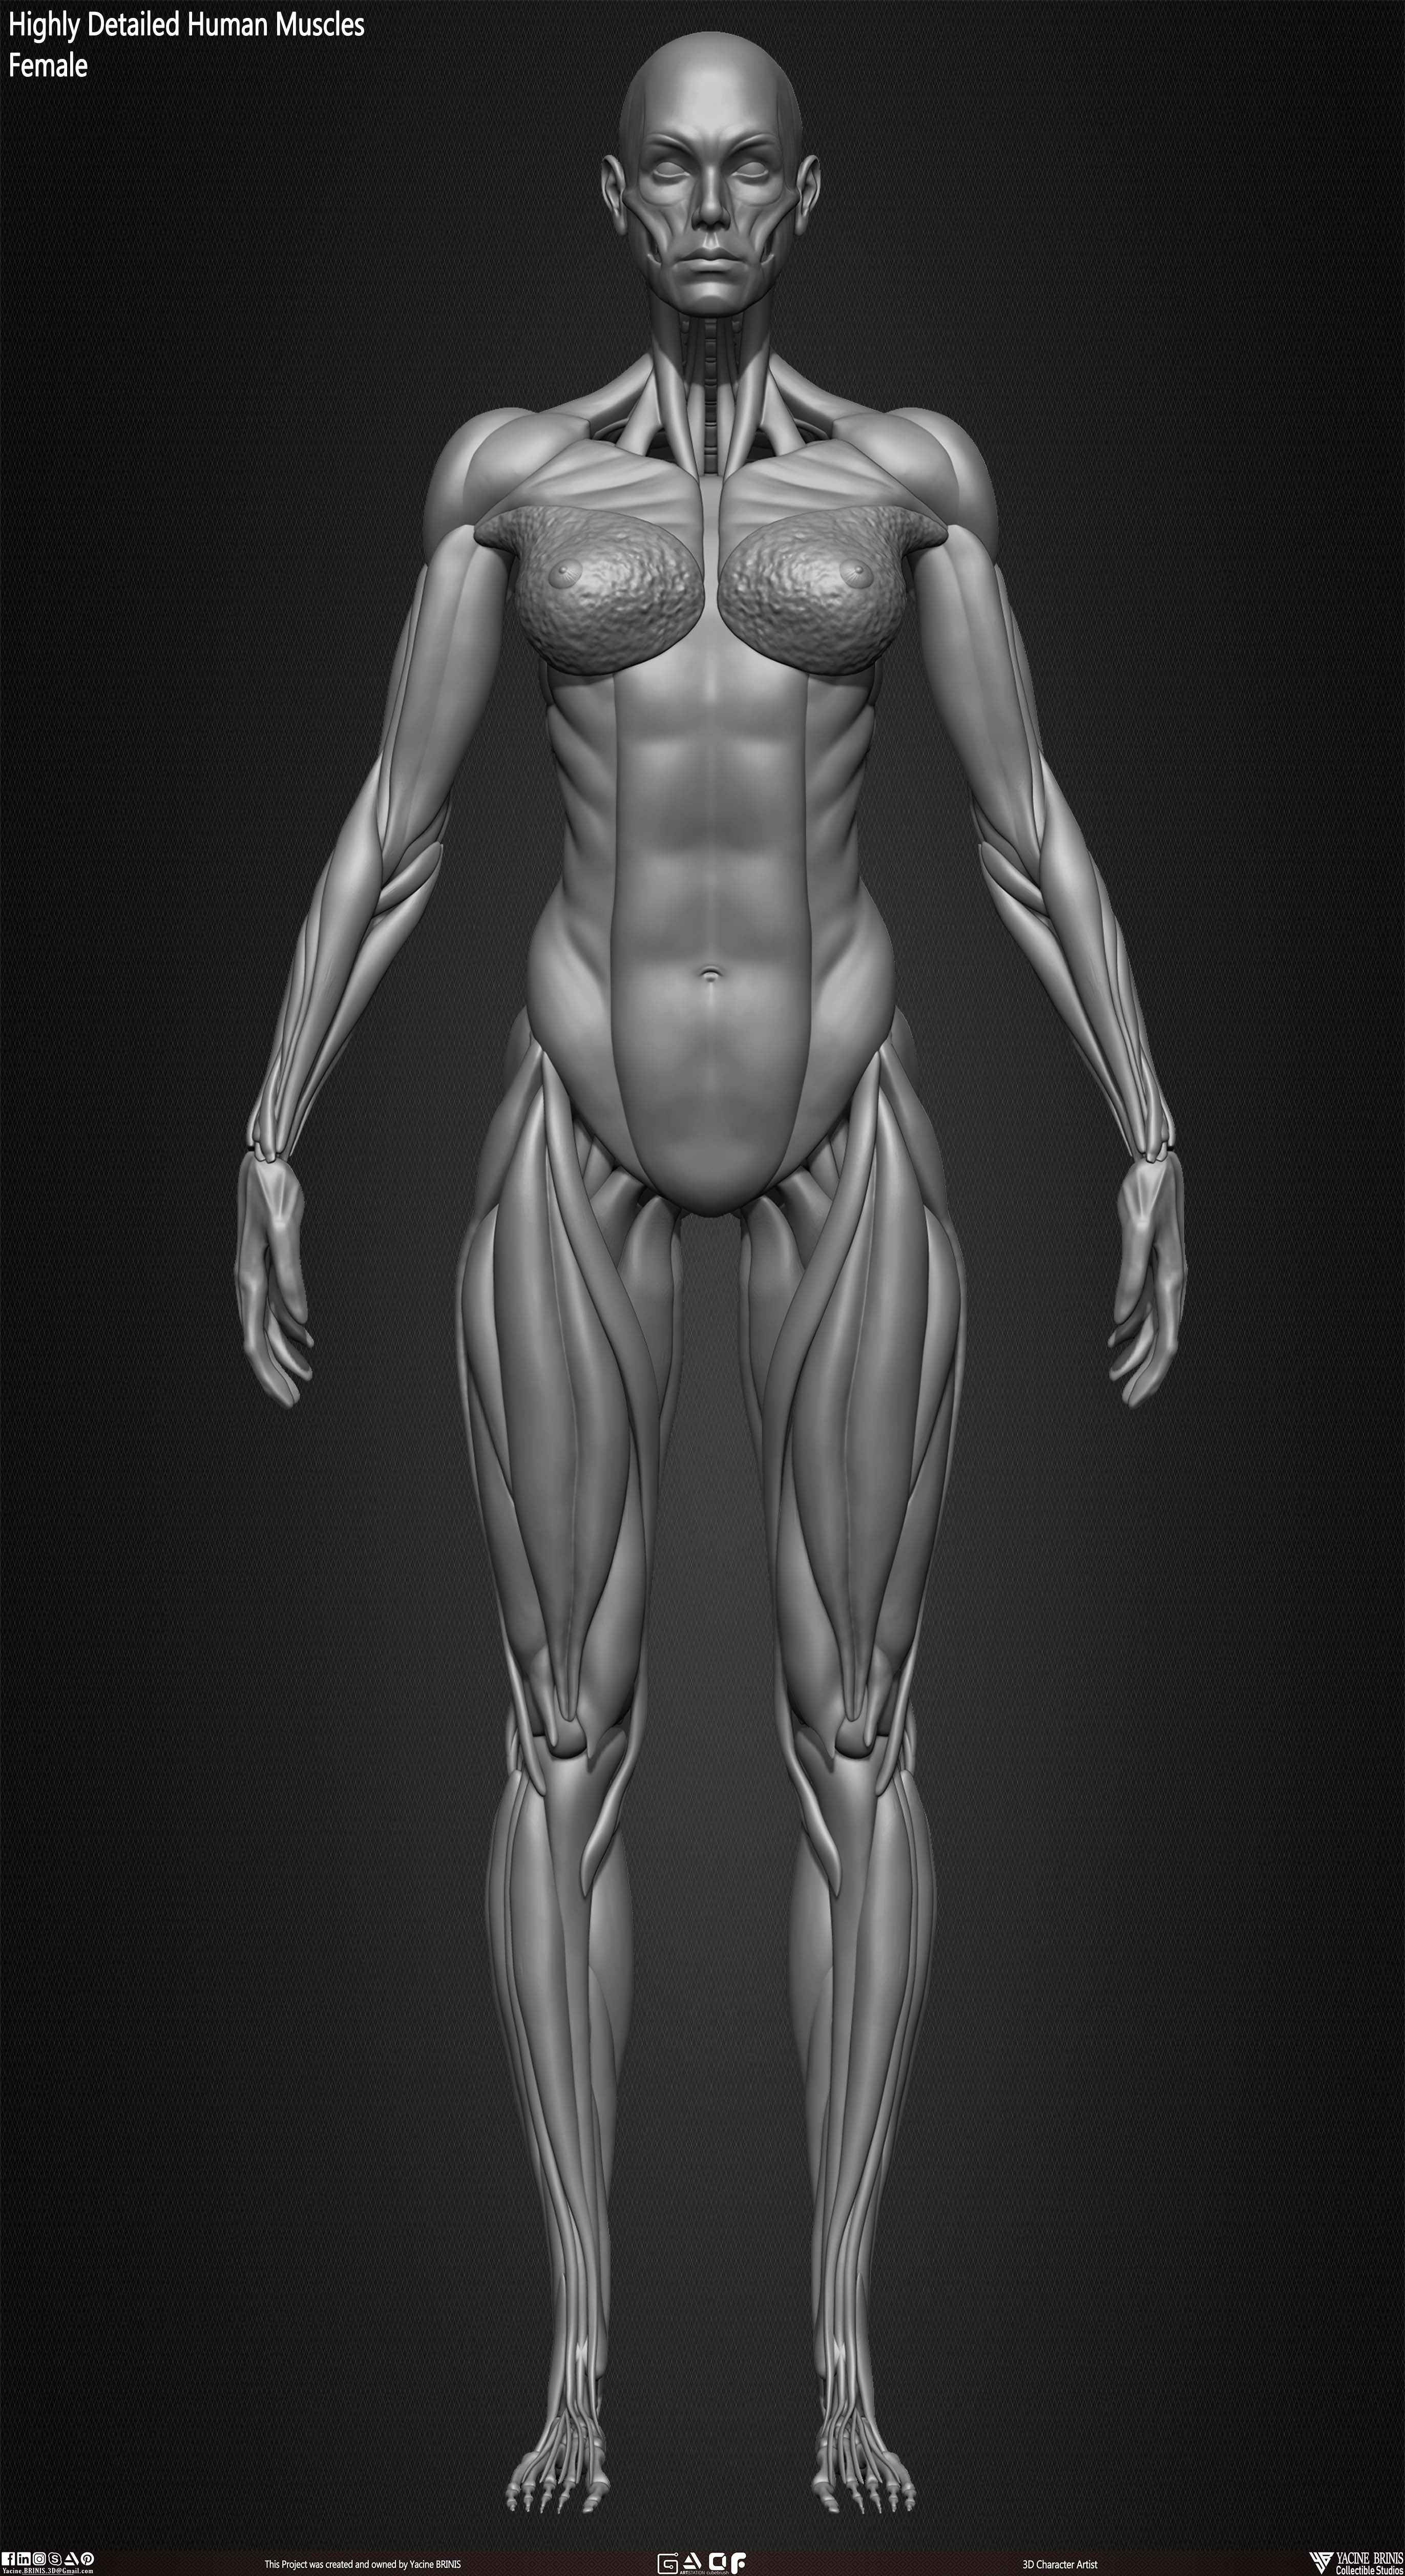 Female Human Muscles 3D Model sculpted by Yacine BRINIS 014